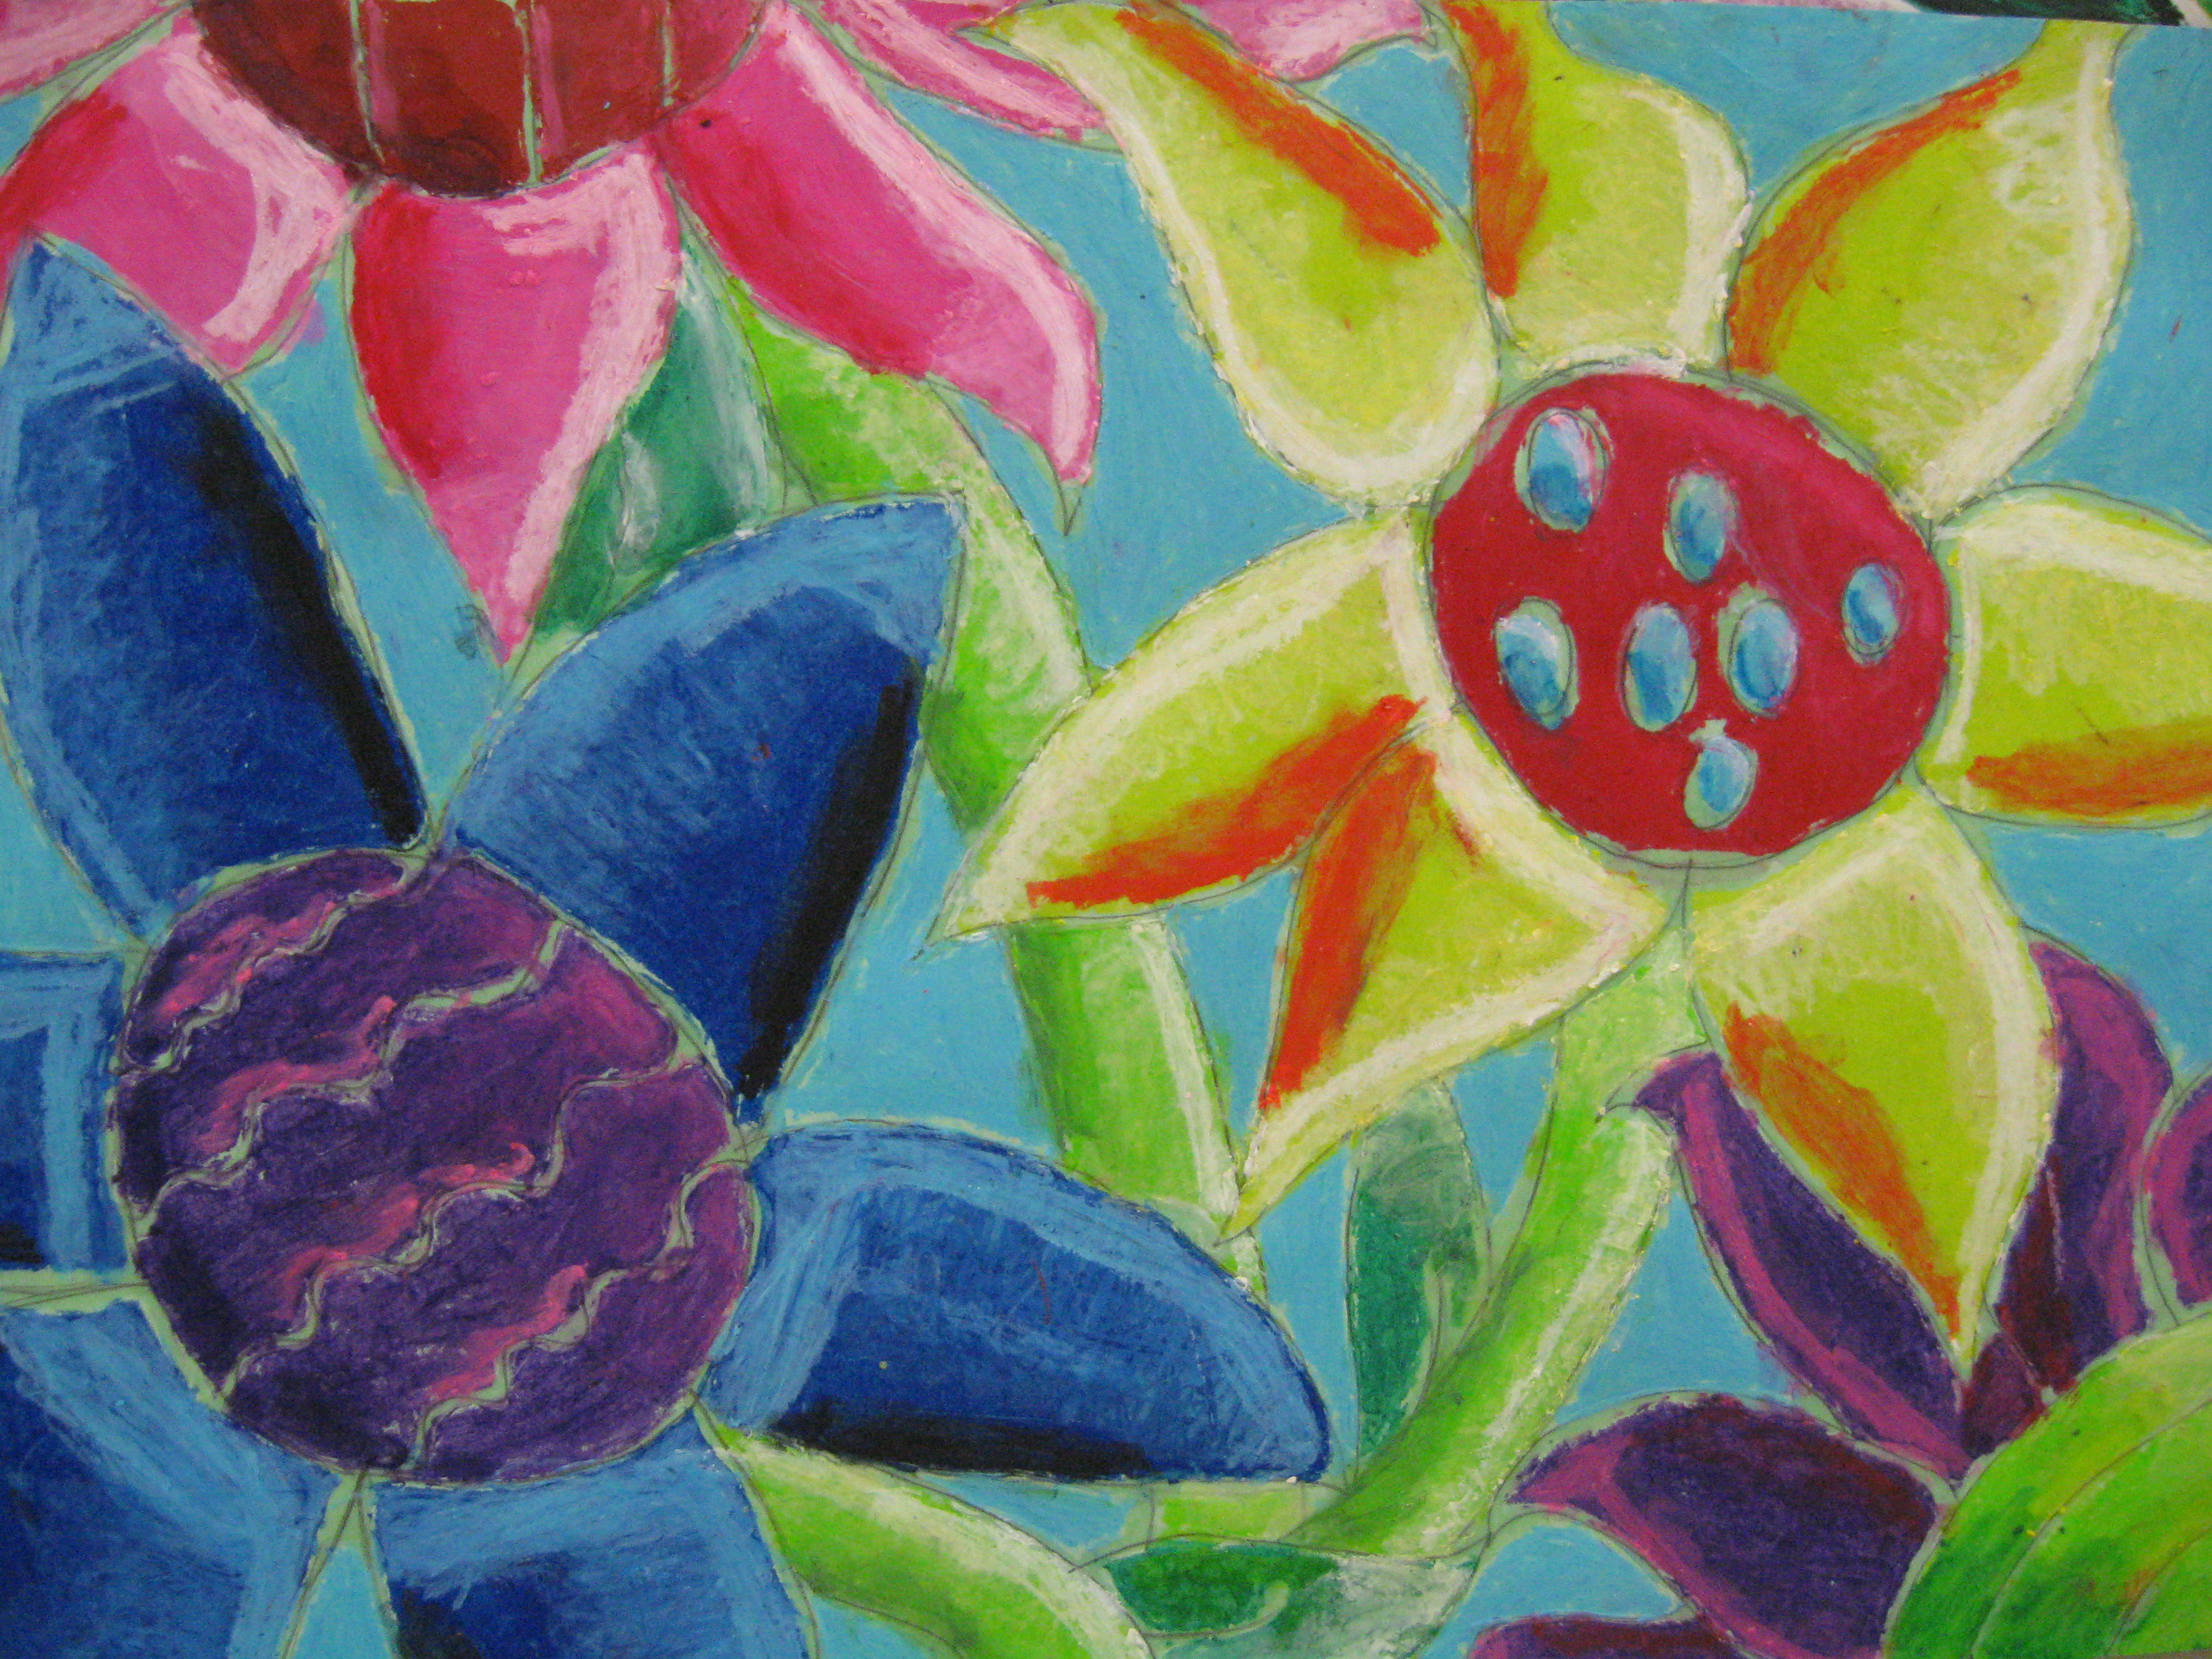 Art Project for Kids: Oil Pastel Still Life Inspired by Georgia O